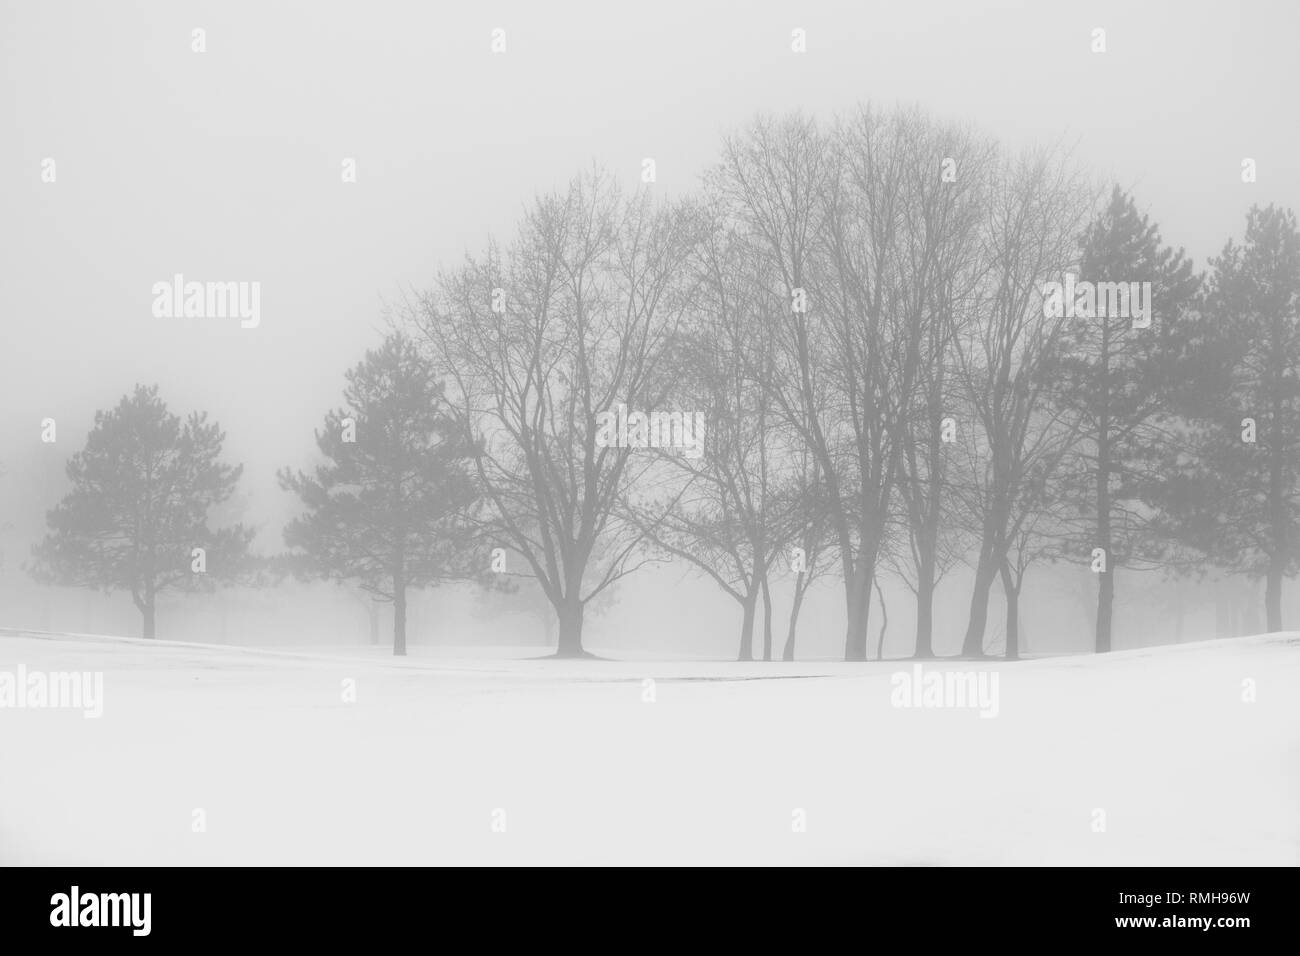 Row of Trees in Fog and Snow Stock Photo